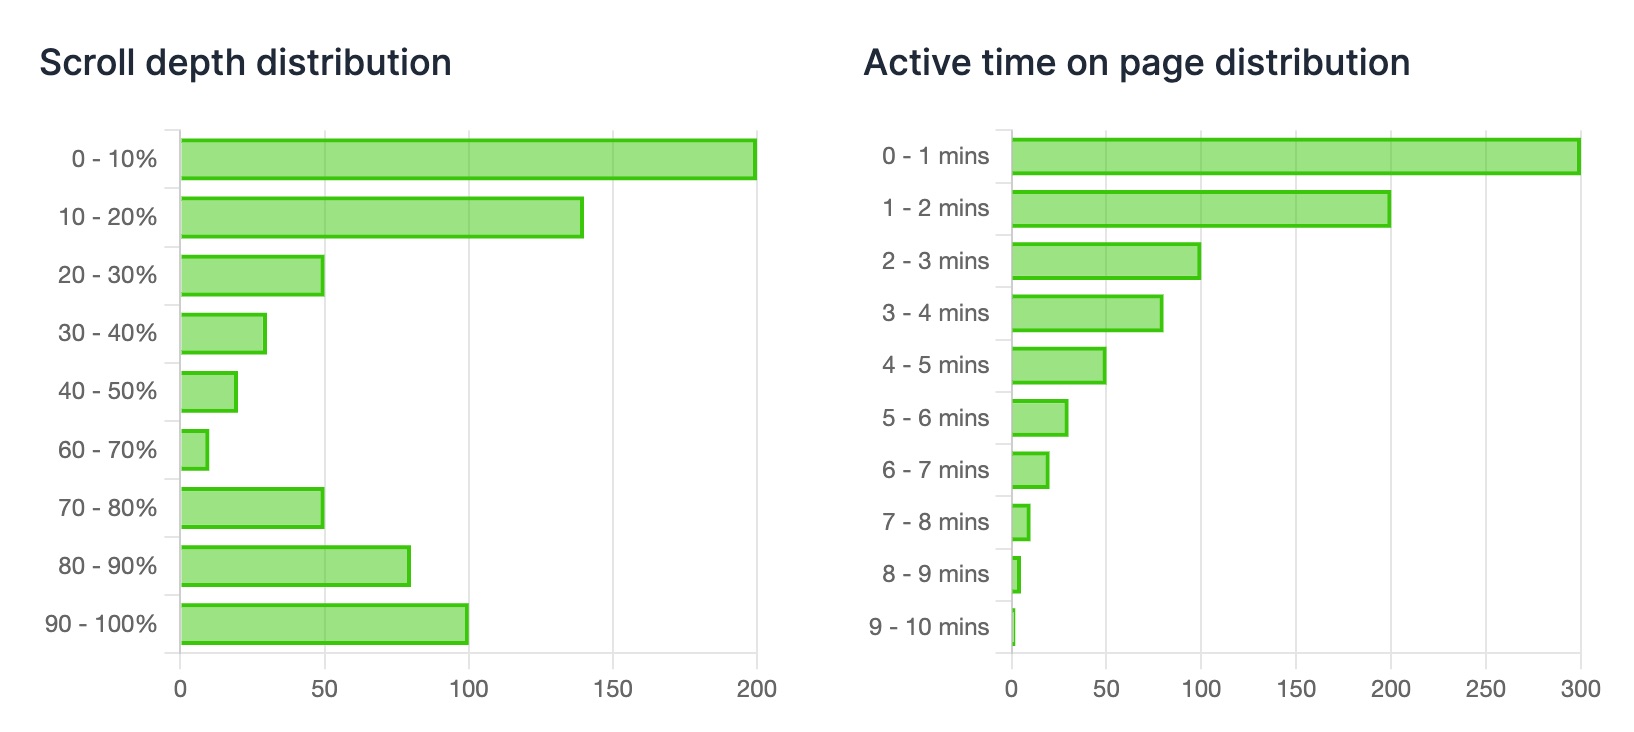 A screenshot of Parable’s scroll depth and average time on page distribution charts.